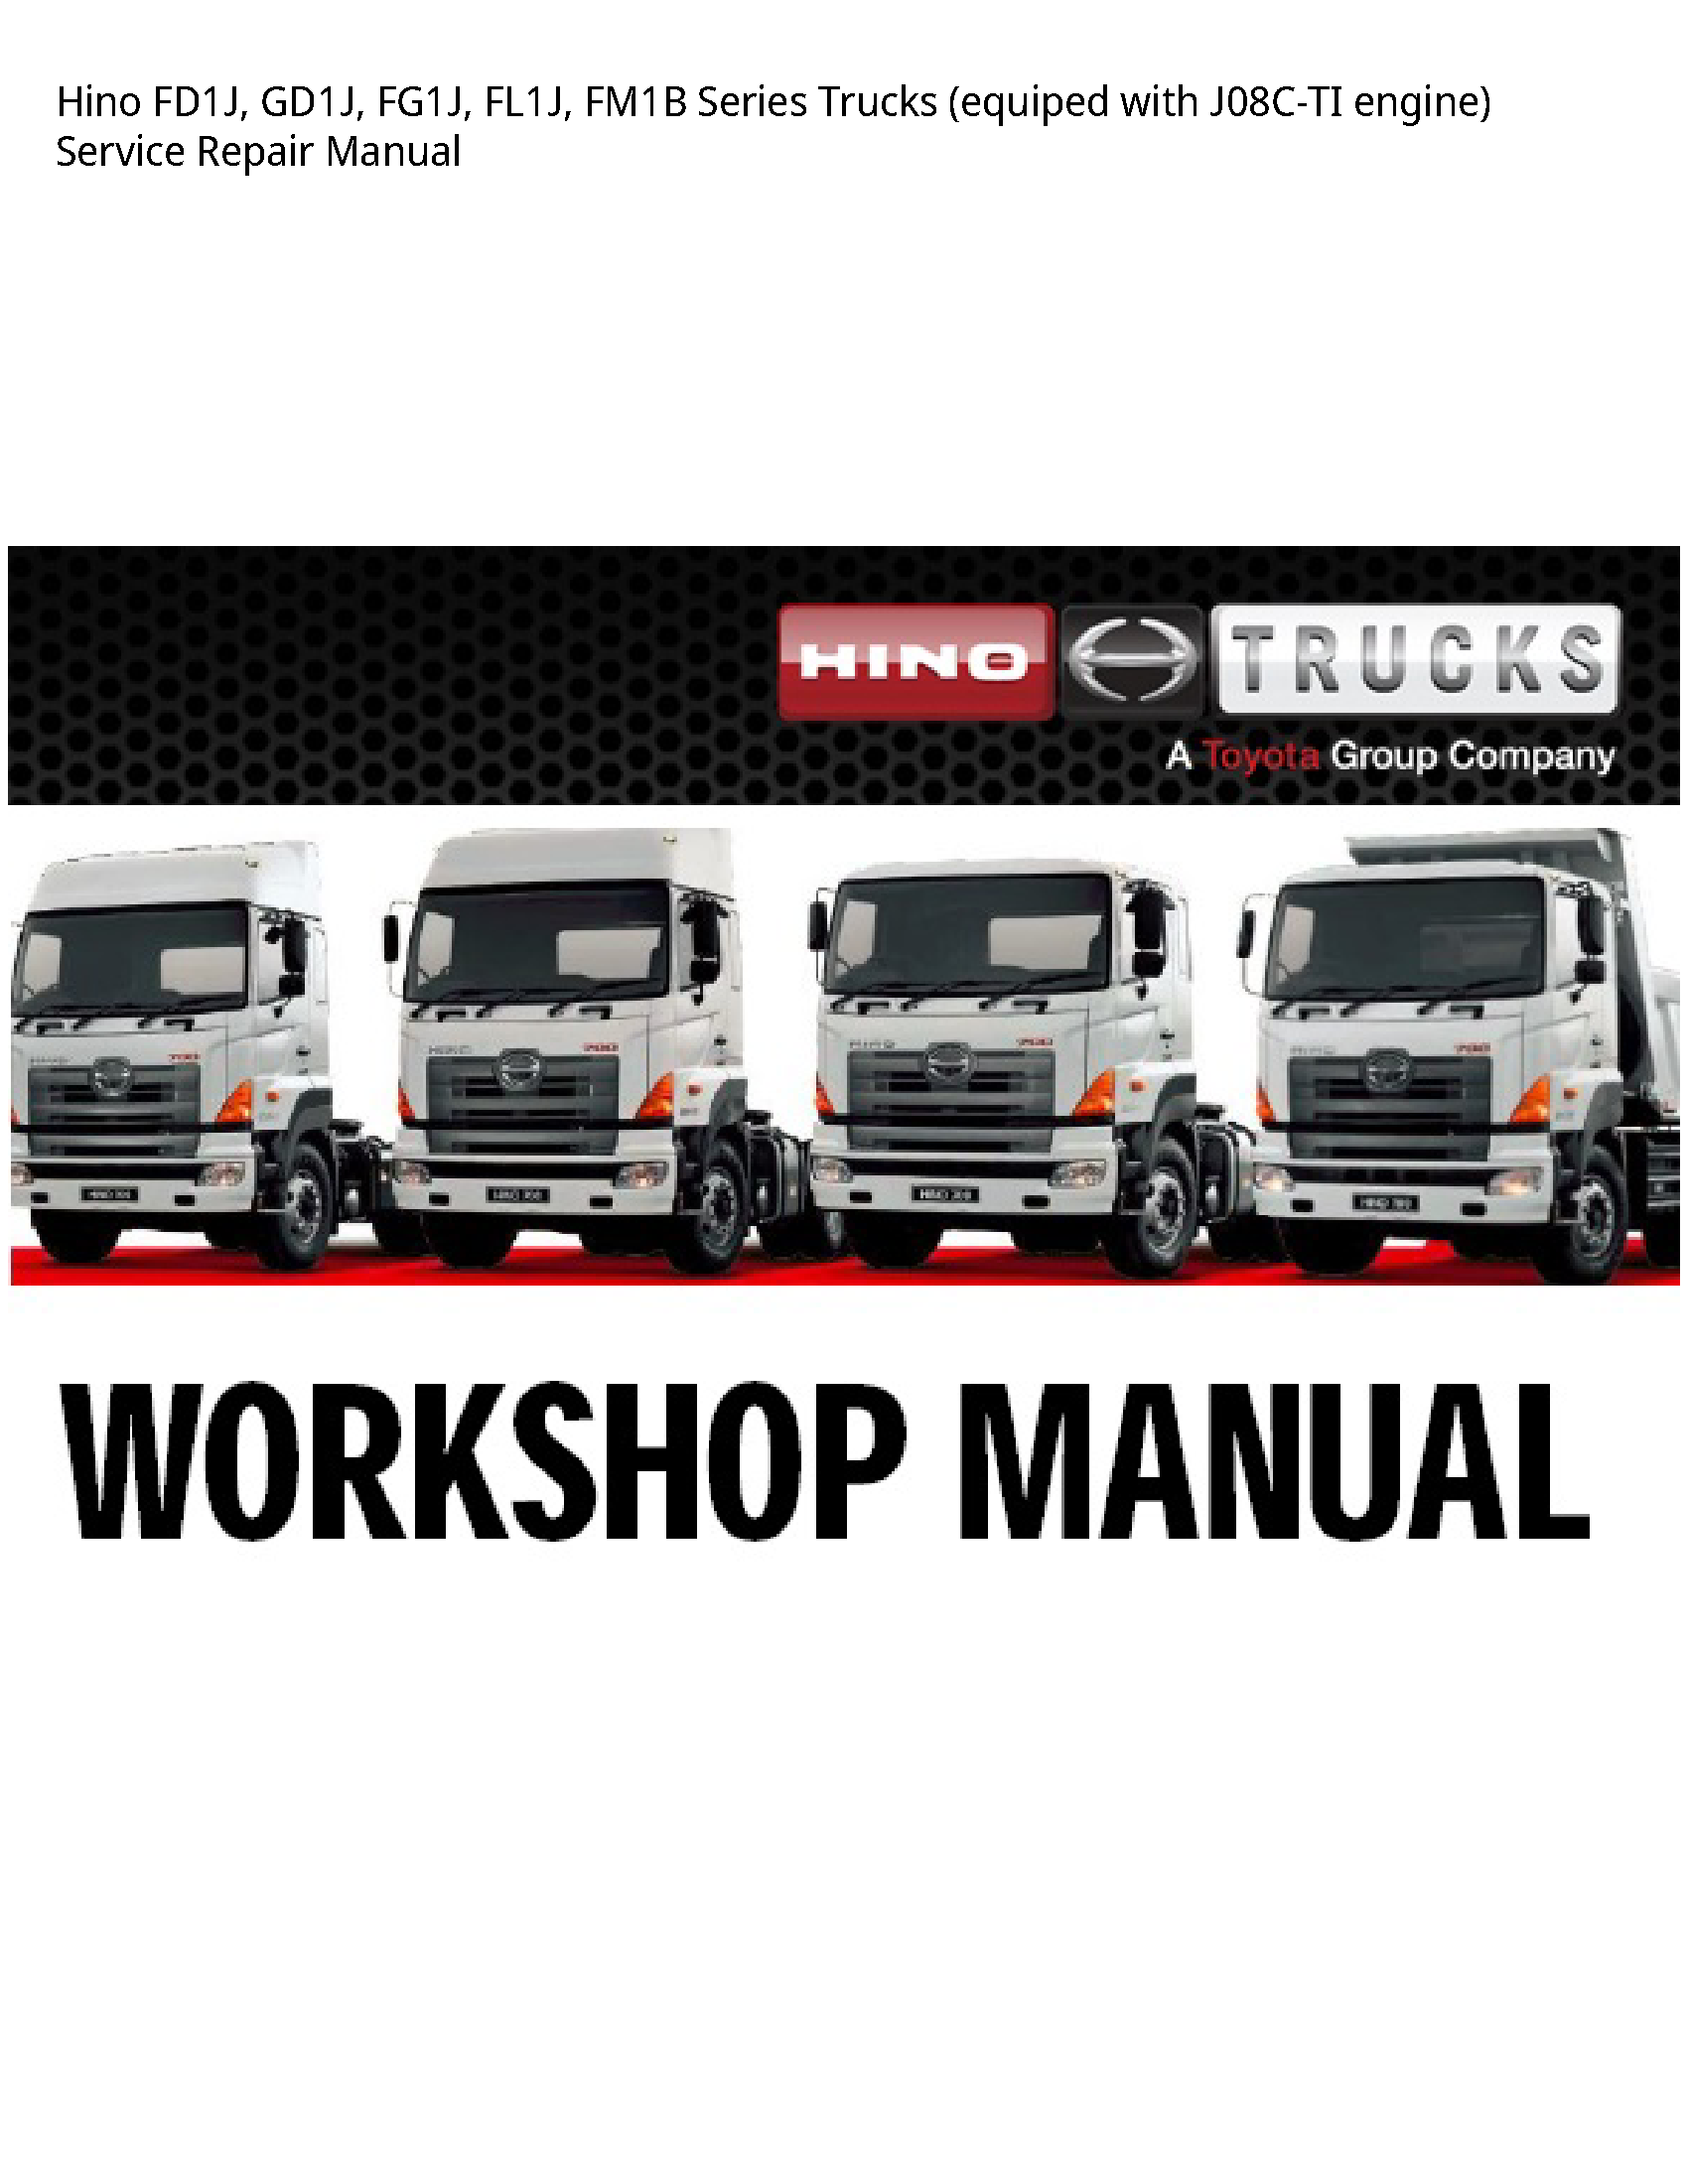 Hino FD1J Series Trucks equiped with engine manual